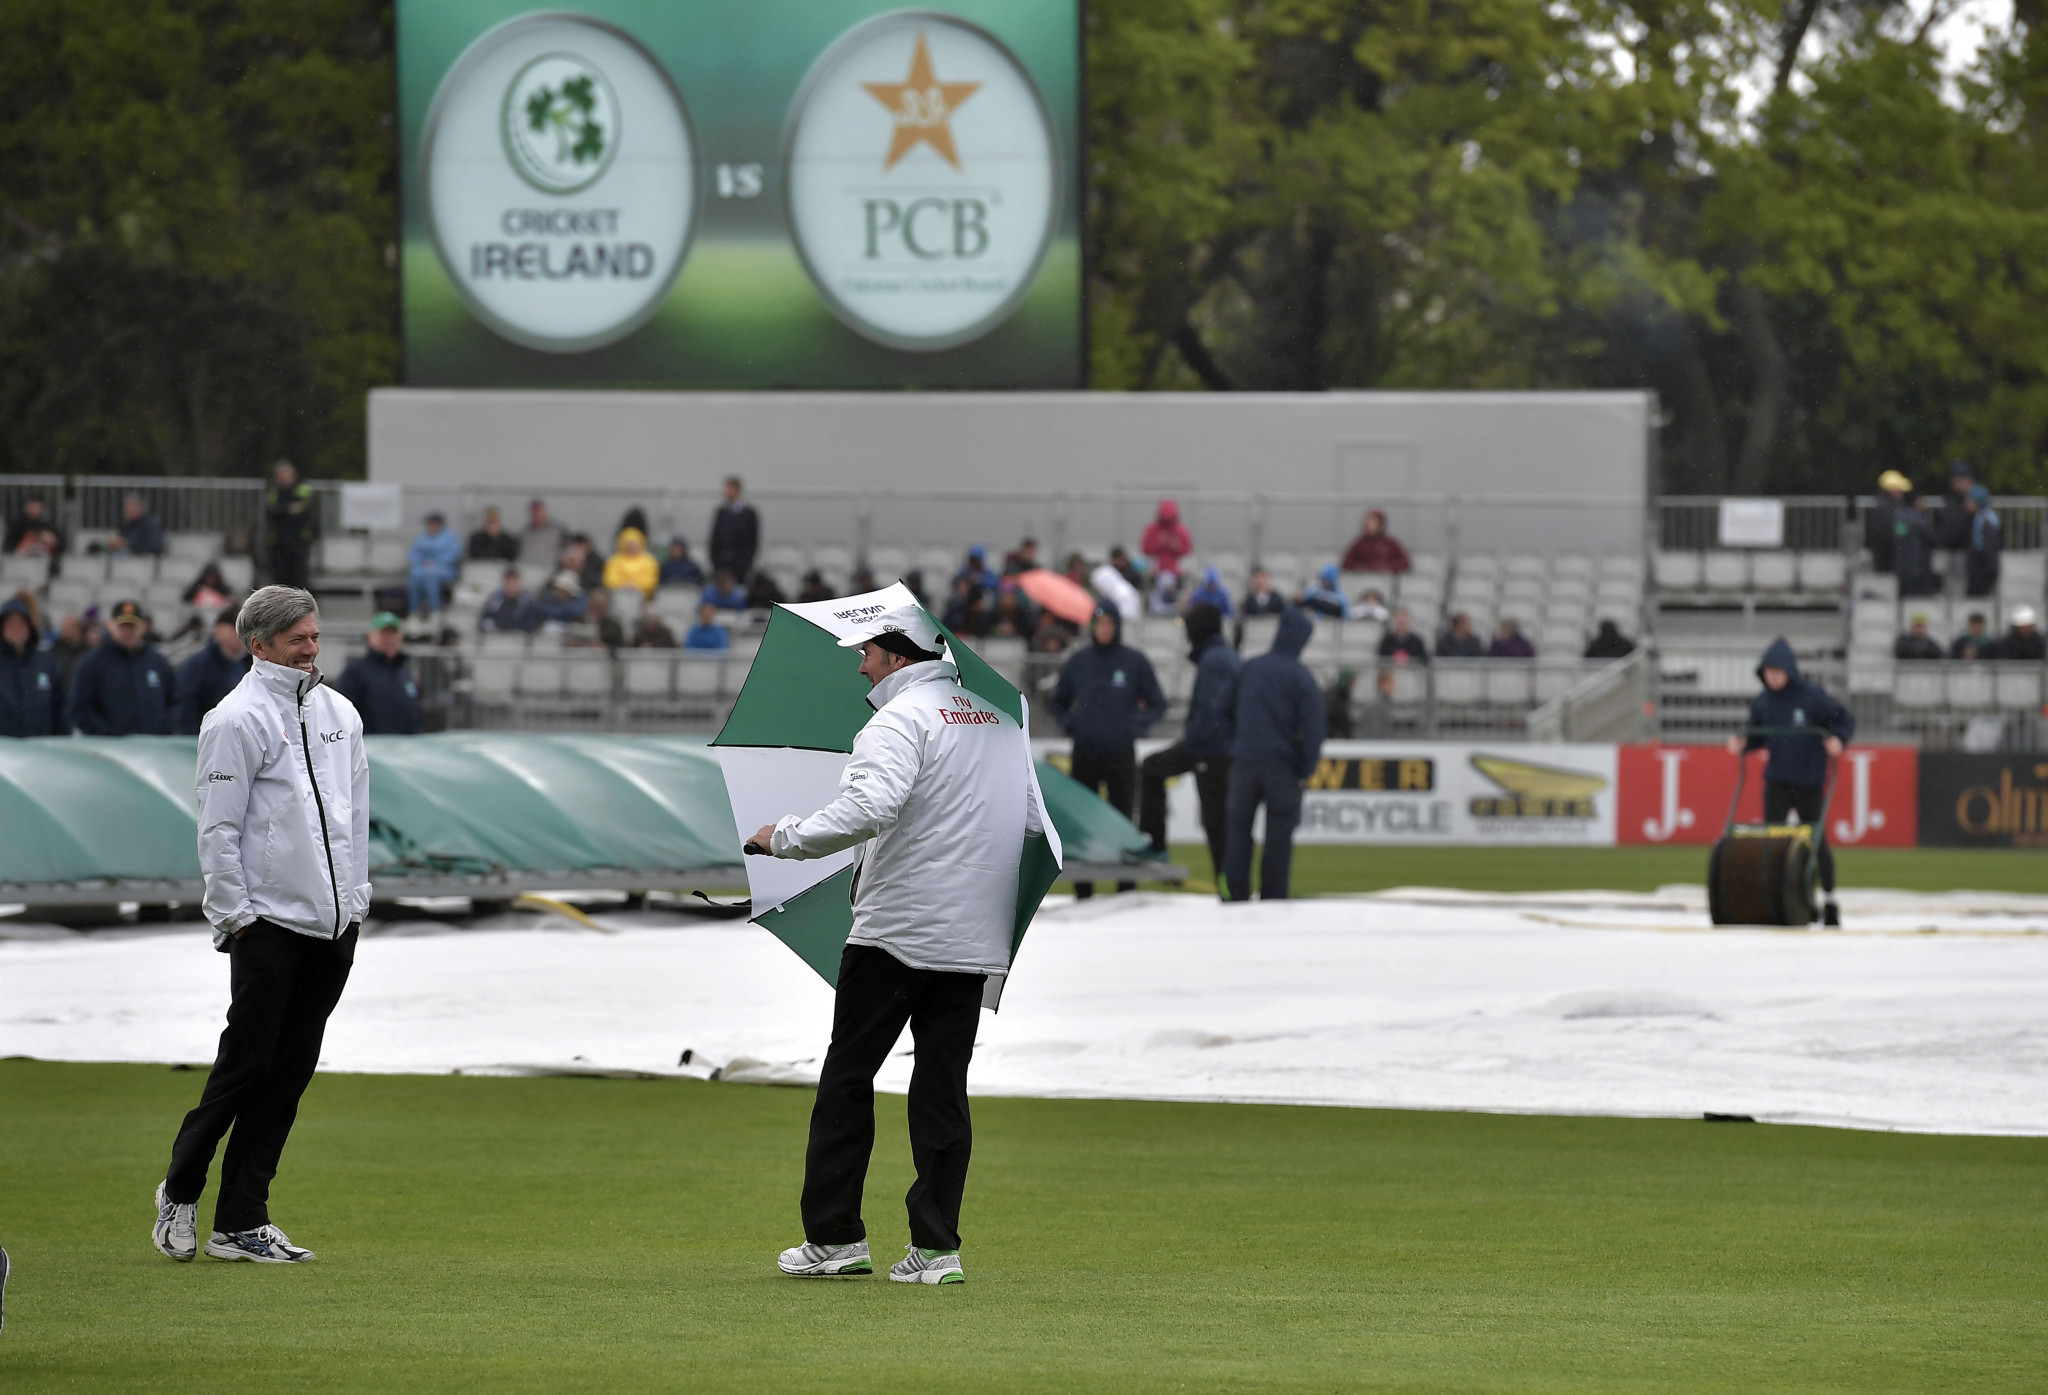 Ireland were due to make their Test debut against Pakistan today but the first day was washed out ©Getty Images